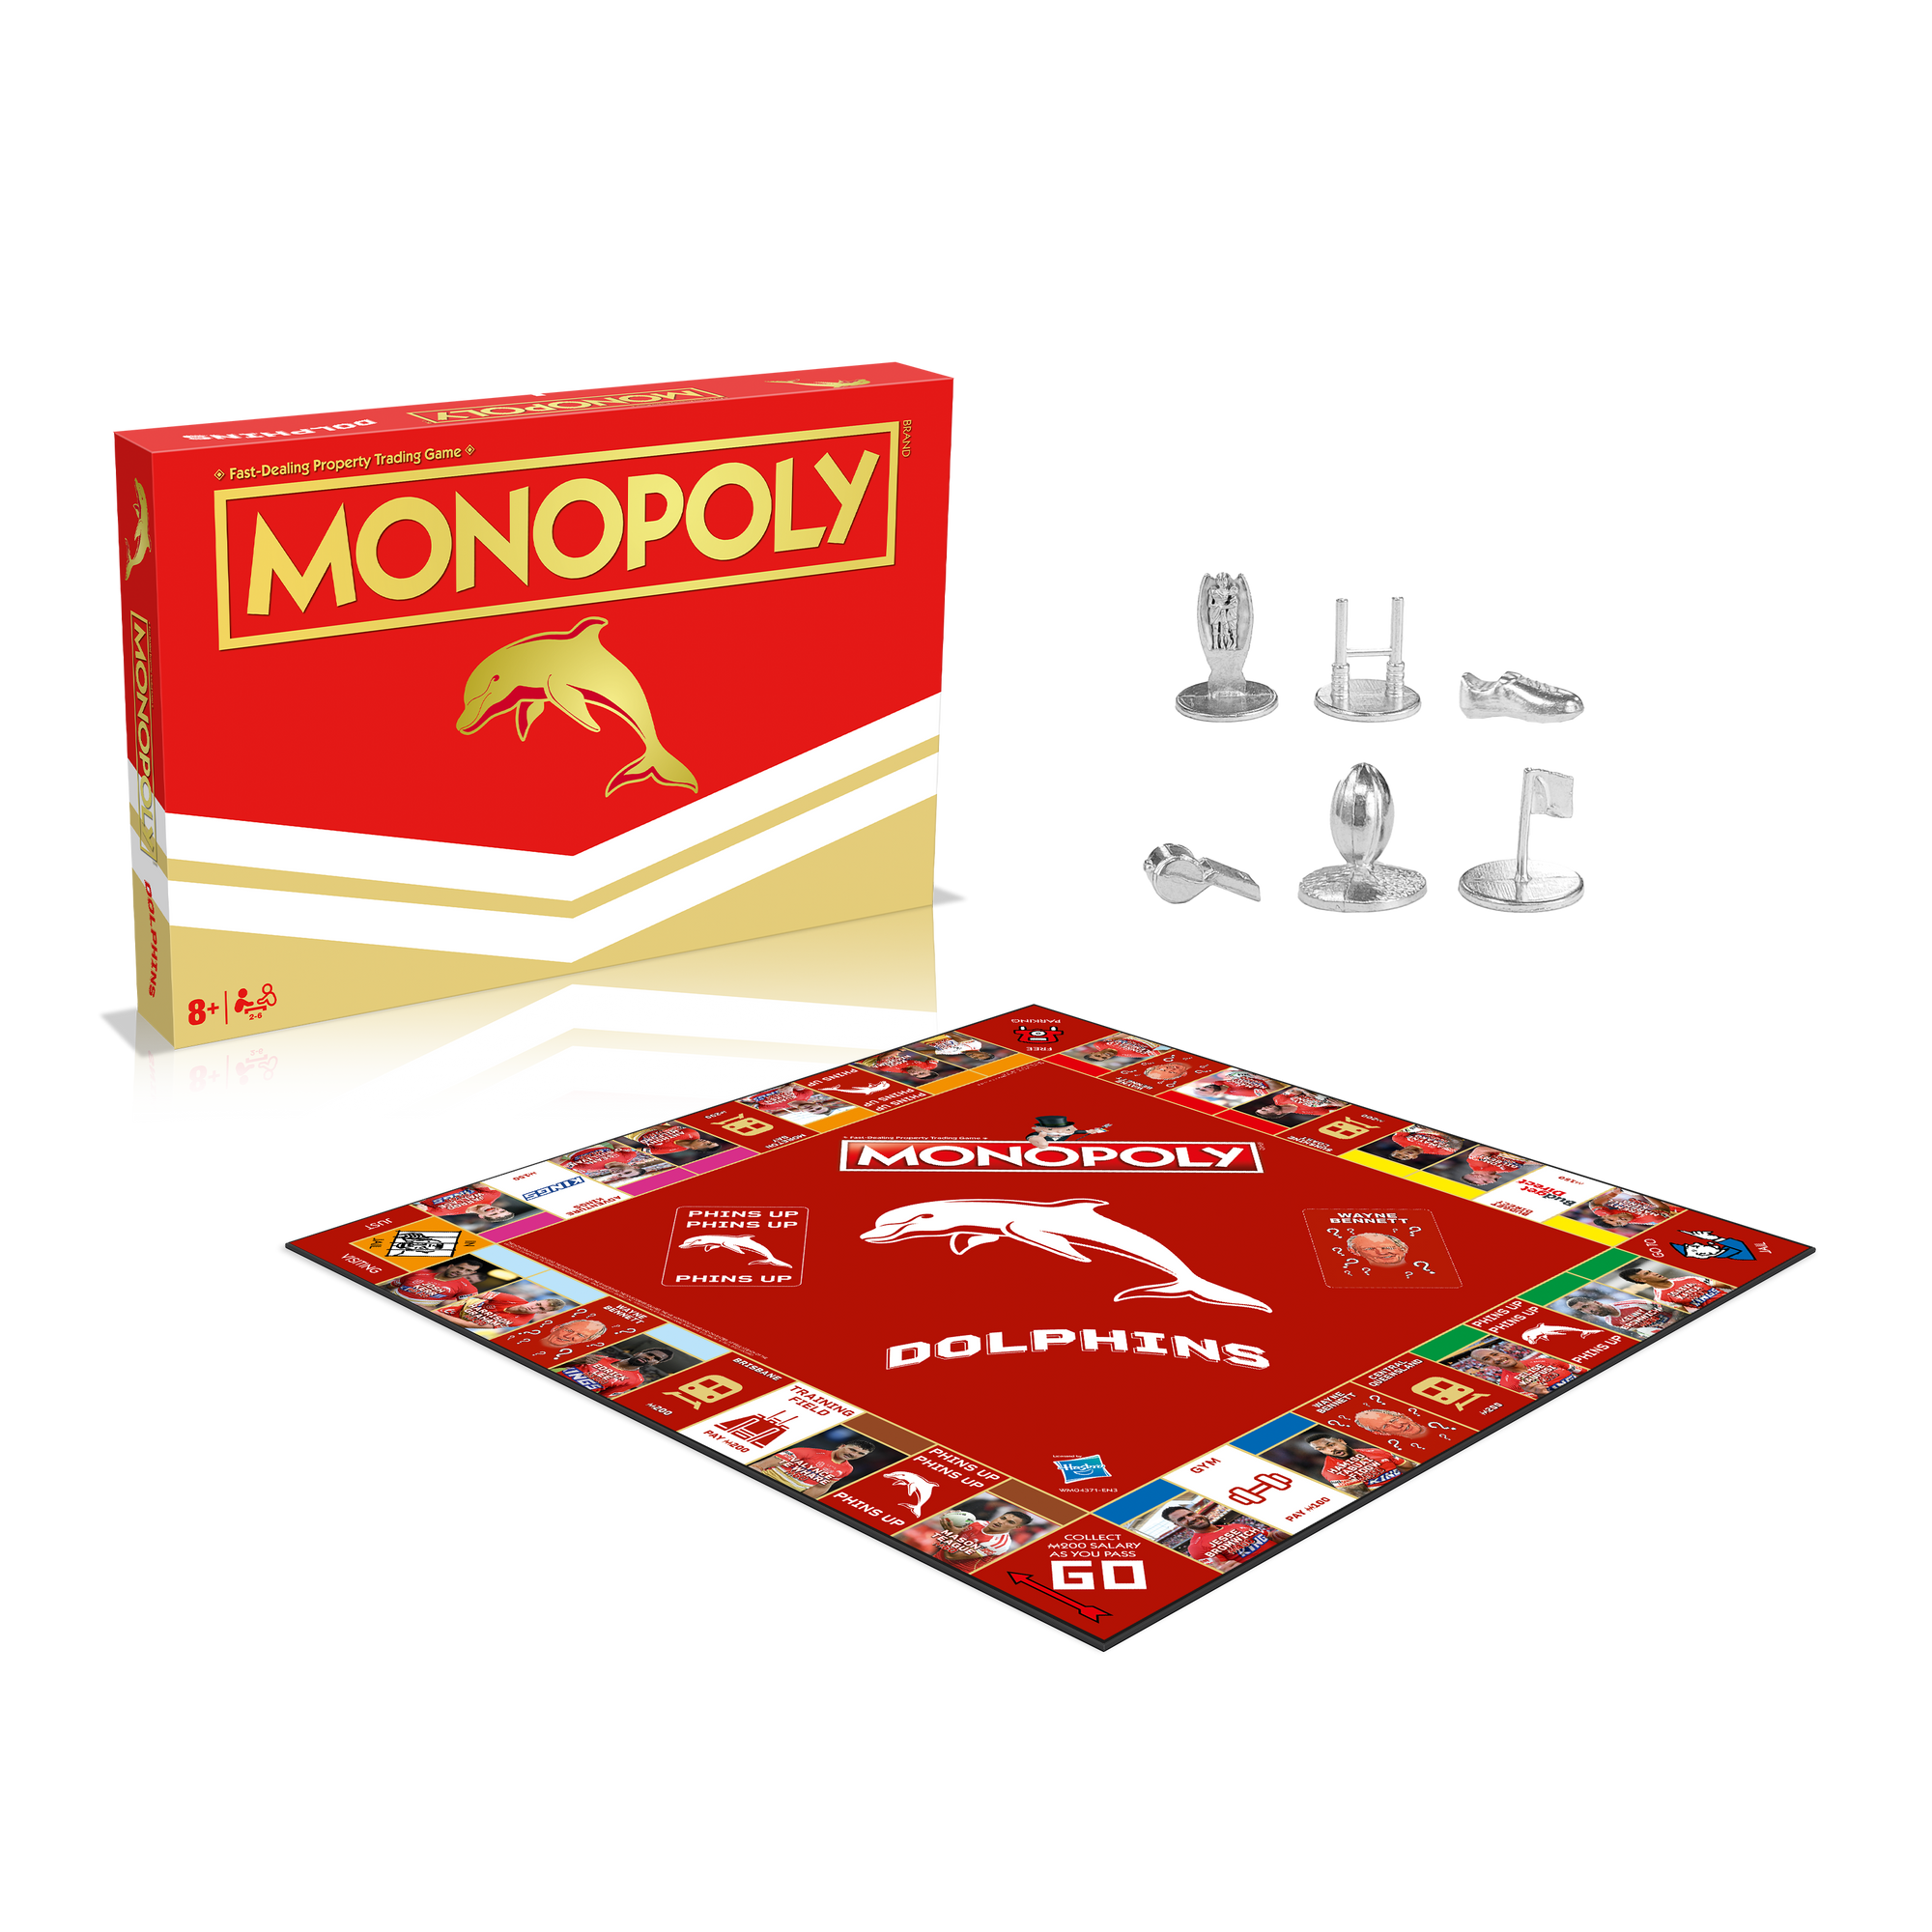 Dolphins Monopoly